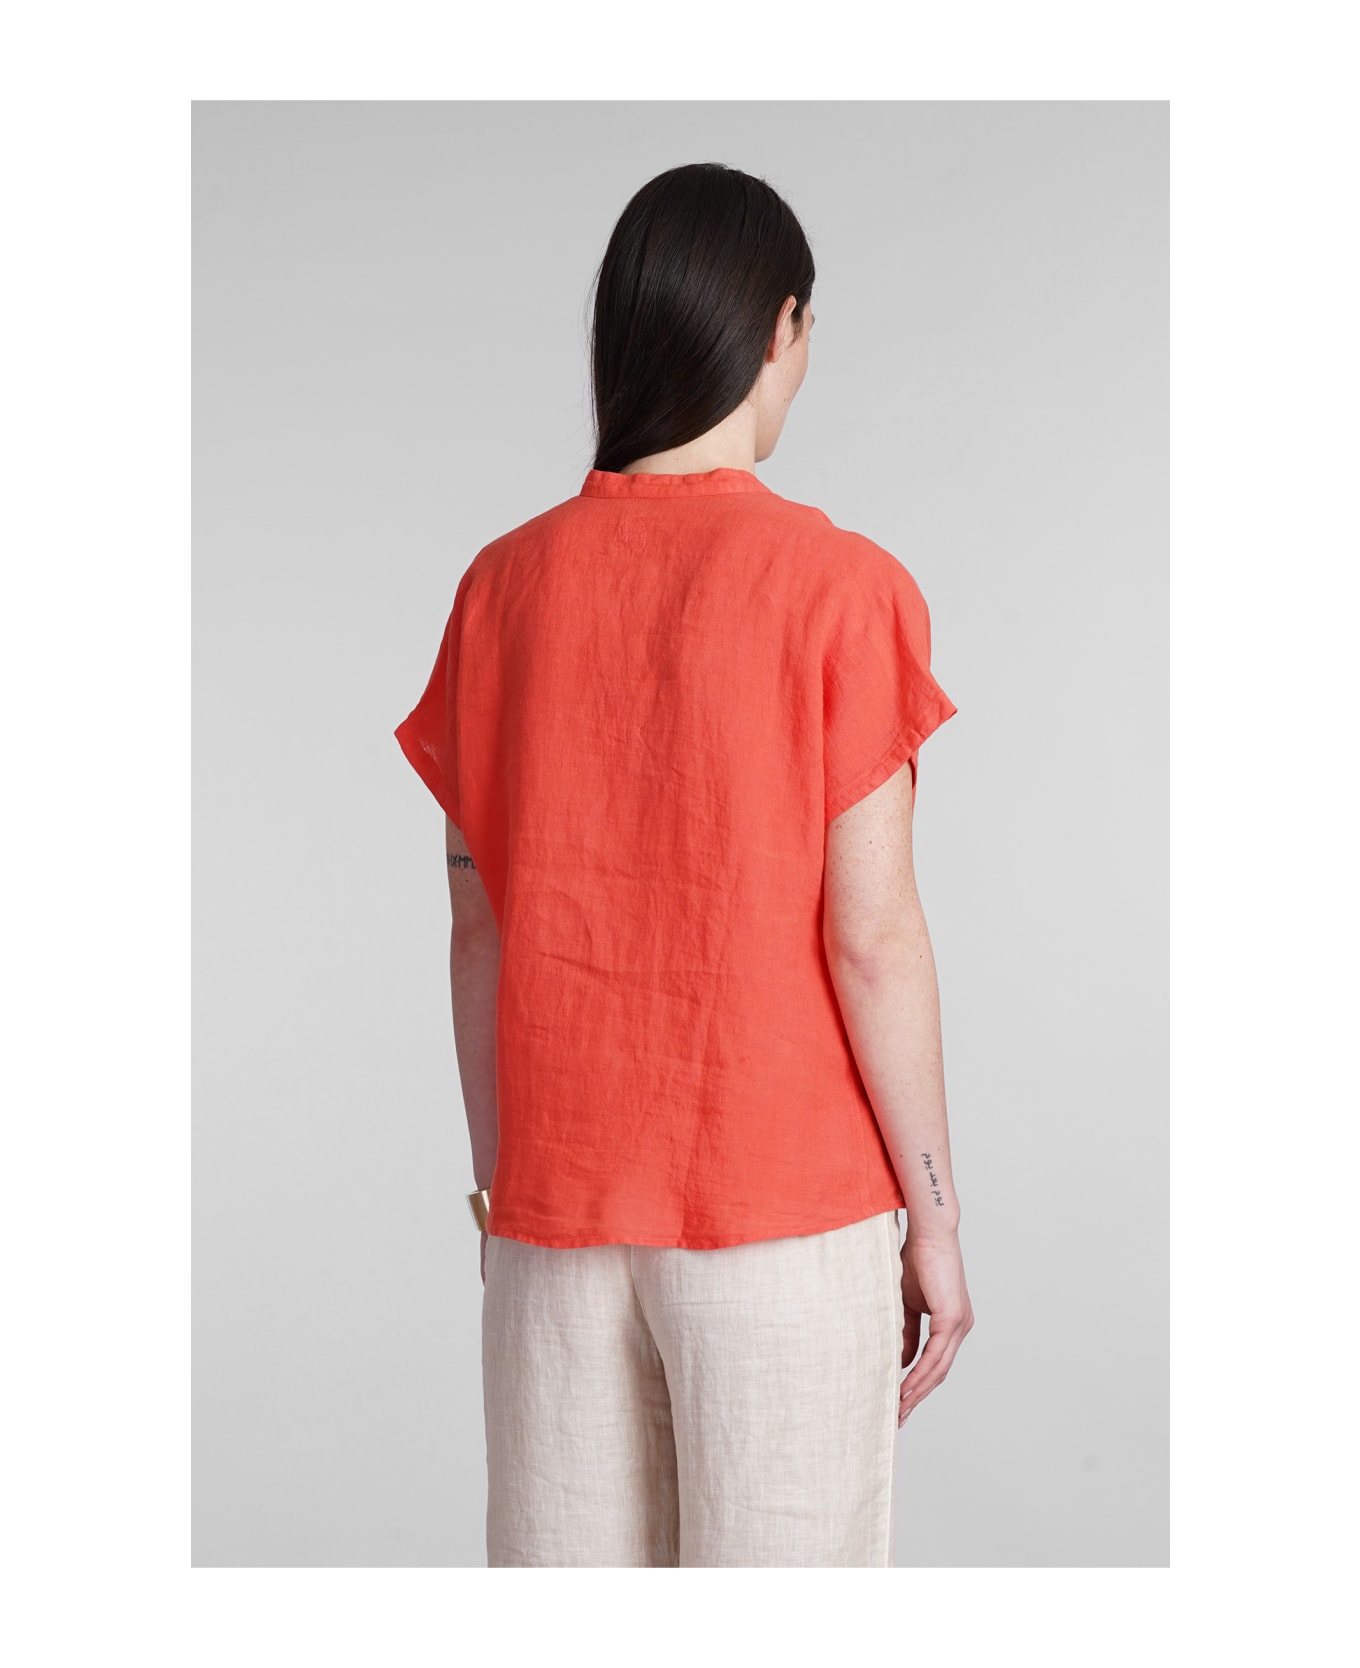 120% Lino Blouse In Red Linen - red ブラウス